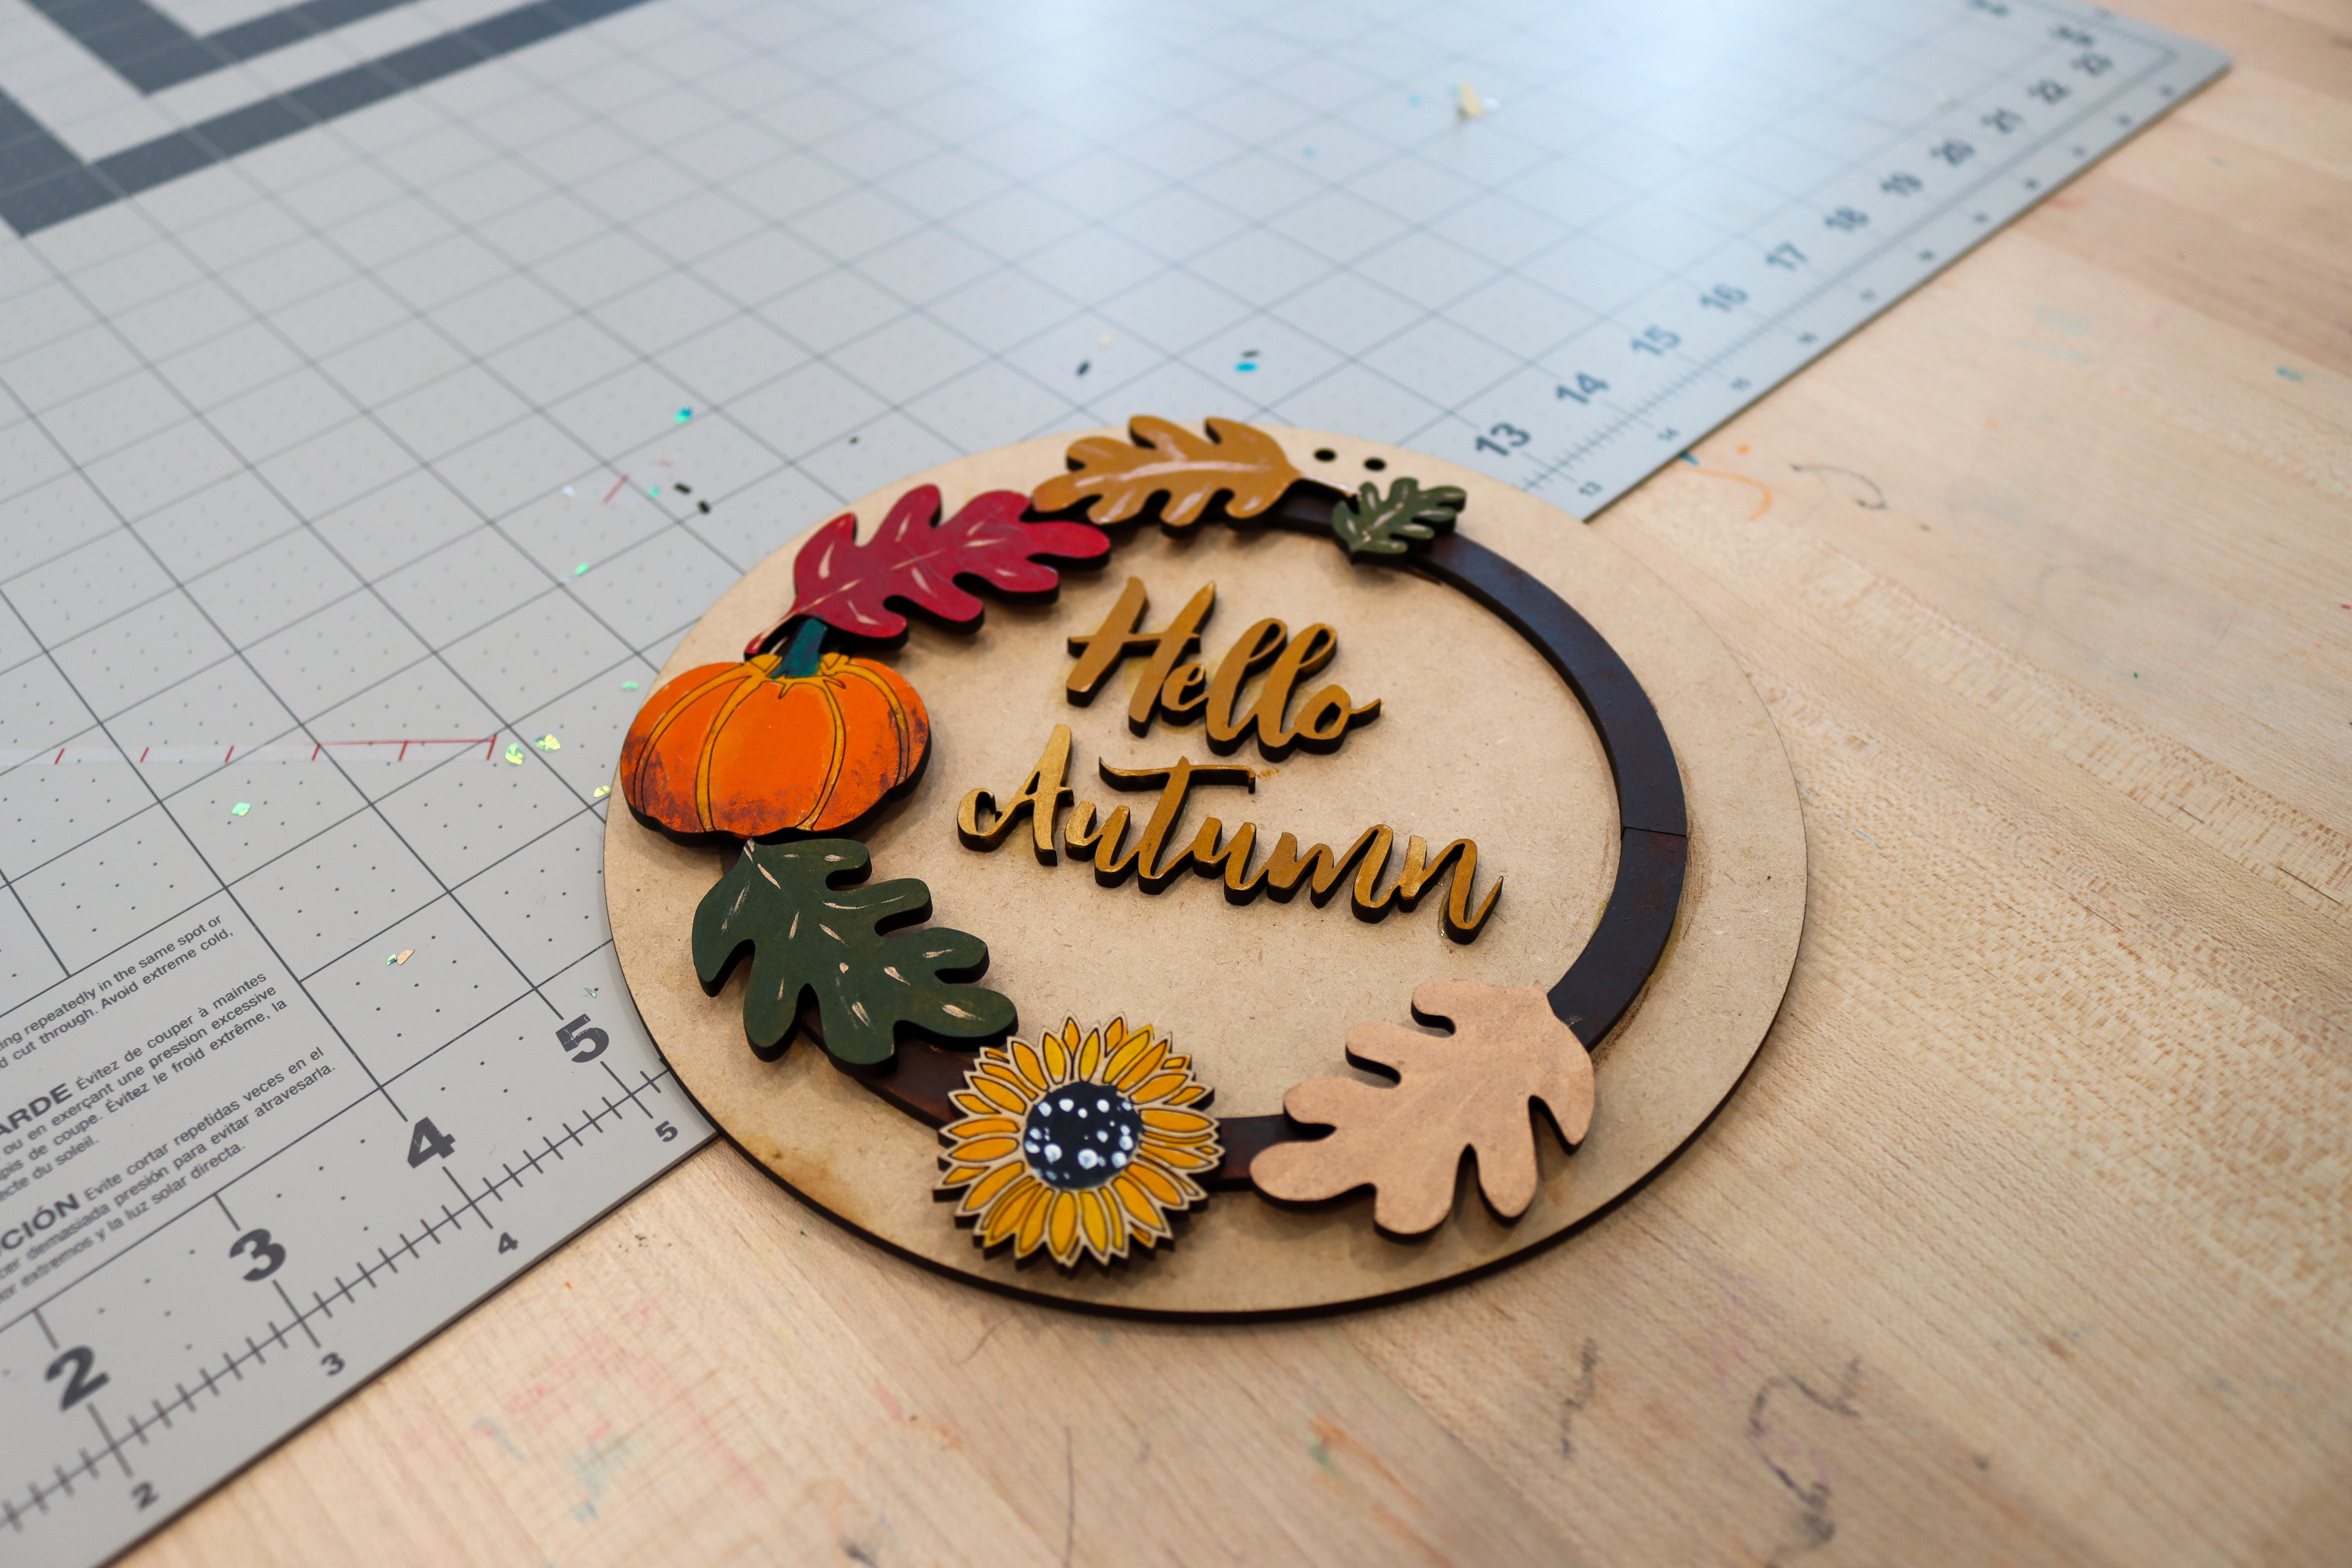 Circular sign made of wood that says hello, autumn in a wooden script. Around the words is a decorative wooden wreath with leaves and a pumpkin. 